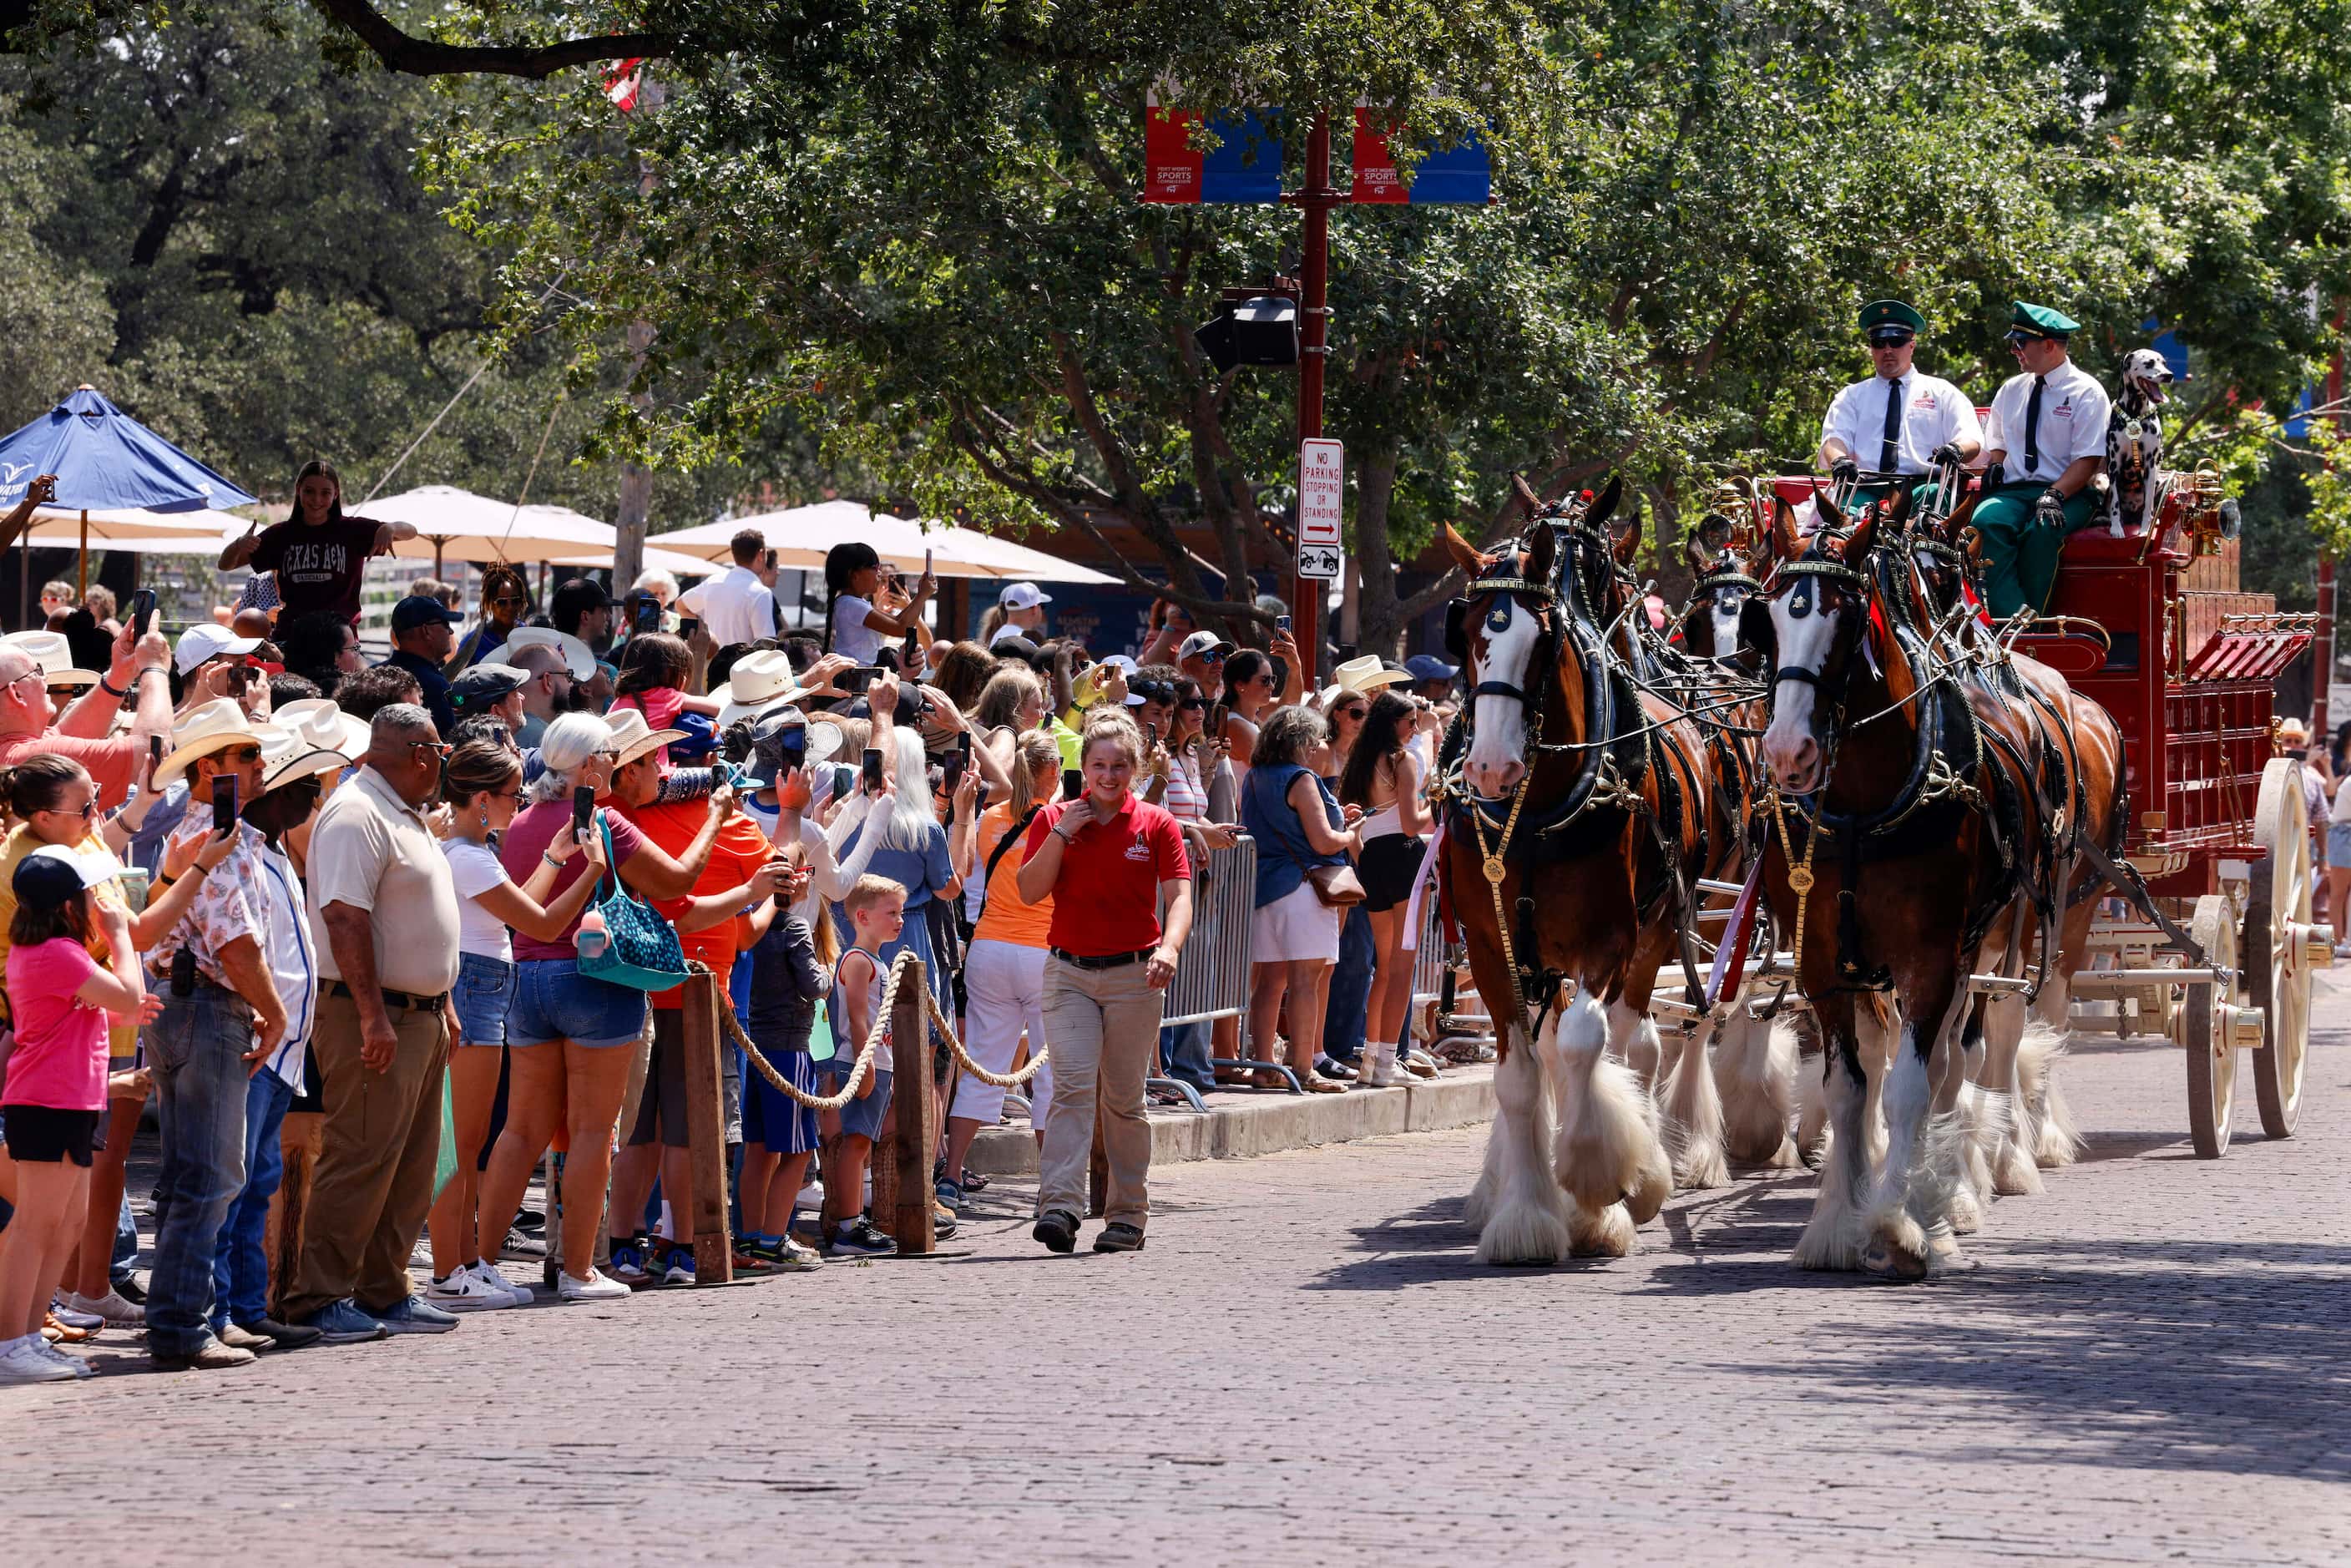 People take photos and videos as the Budweiser Clydesdales make their way through The...